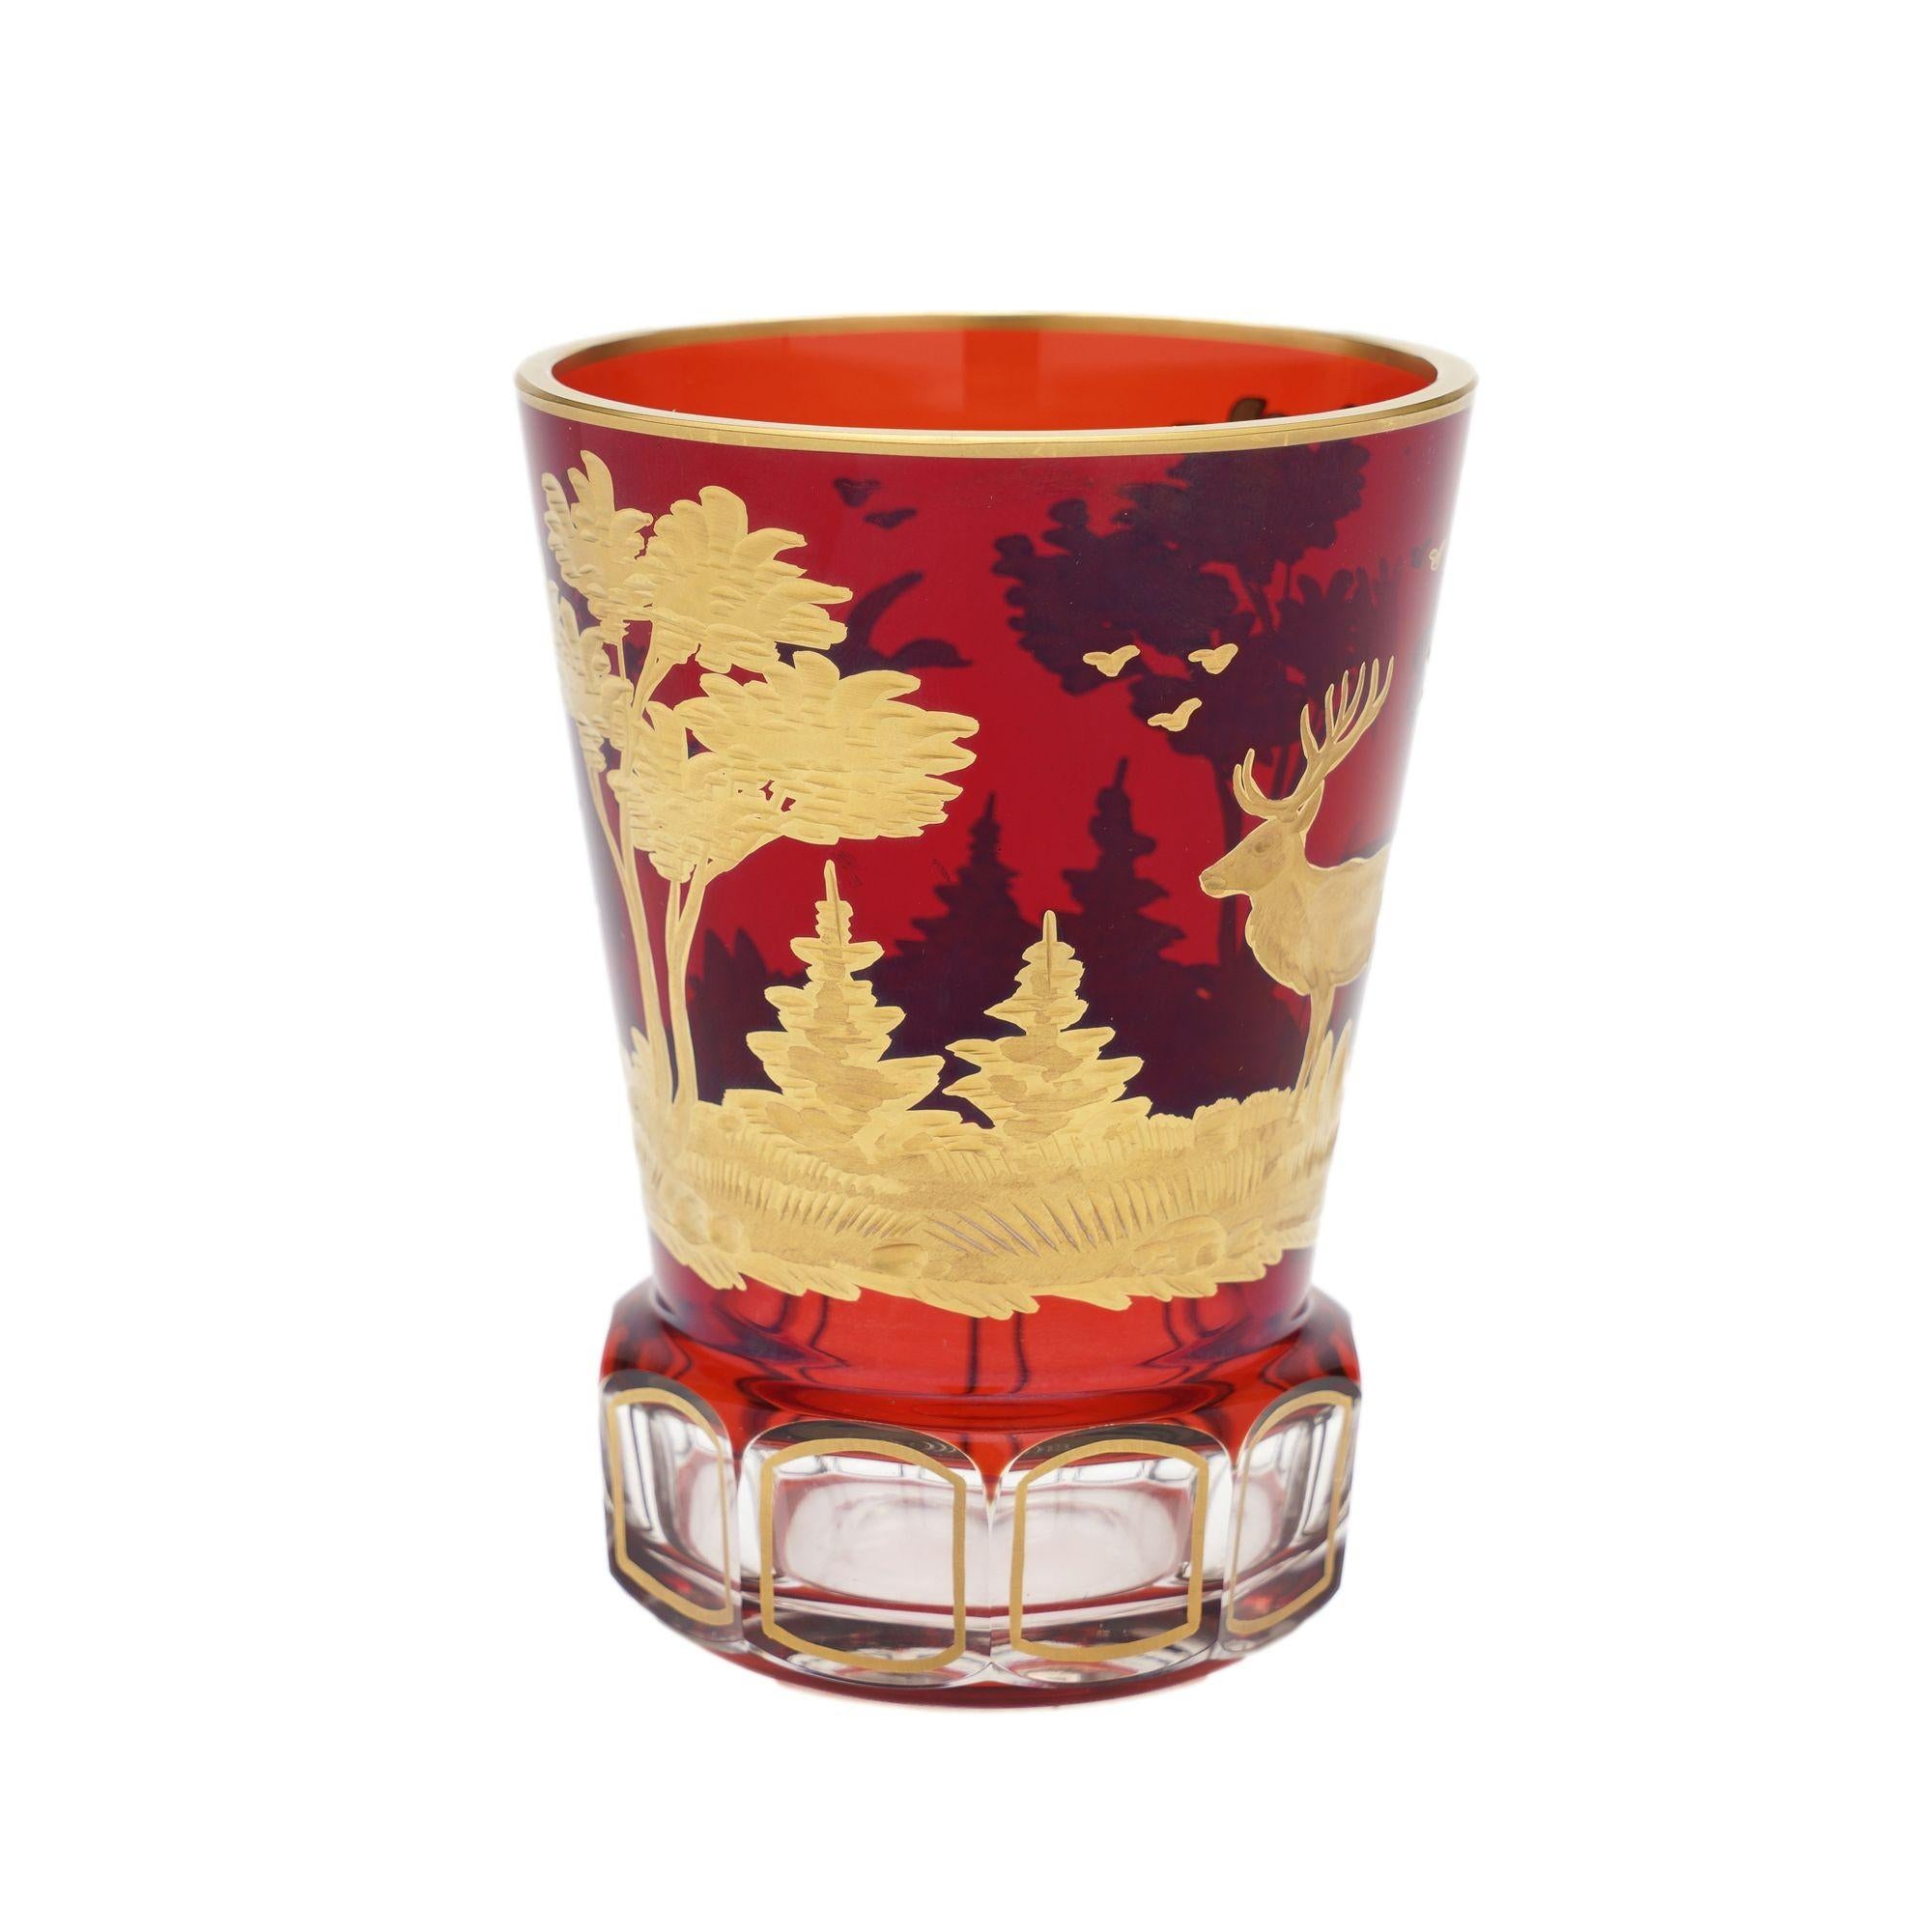 Exceptional quality spa glass tumbler in clear blown and cased ruby glass. The tumbler has been cut and etched with a forest scene in gilt. The scene depicted is of a stag standing in a meadow, surrounded by a variety of trees, with two ducks in